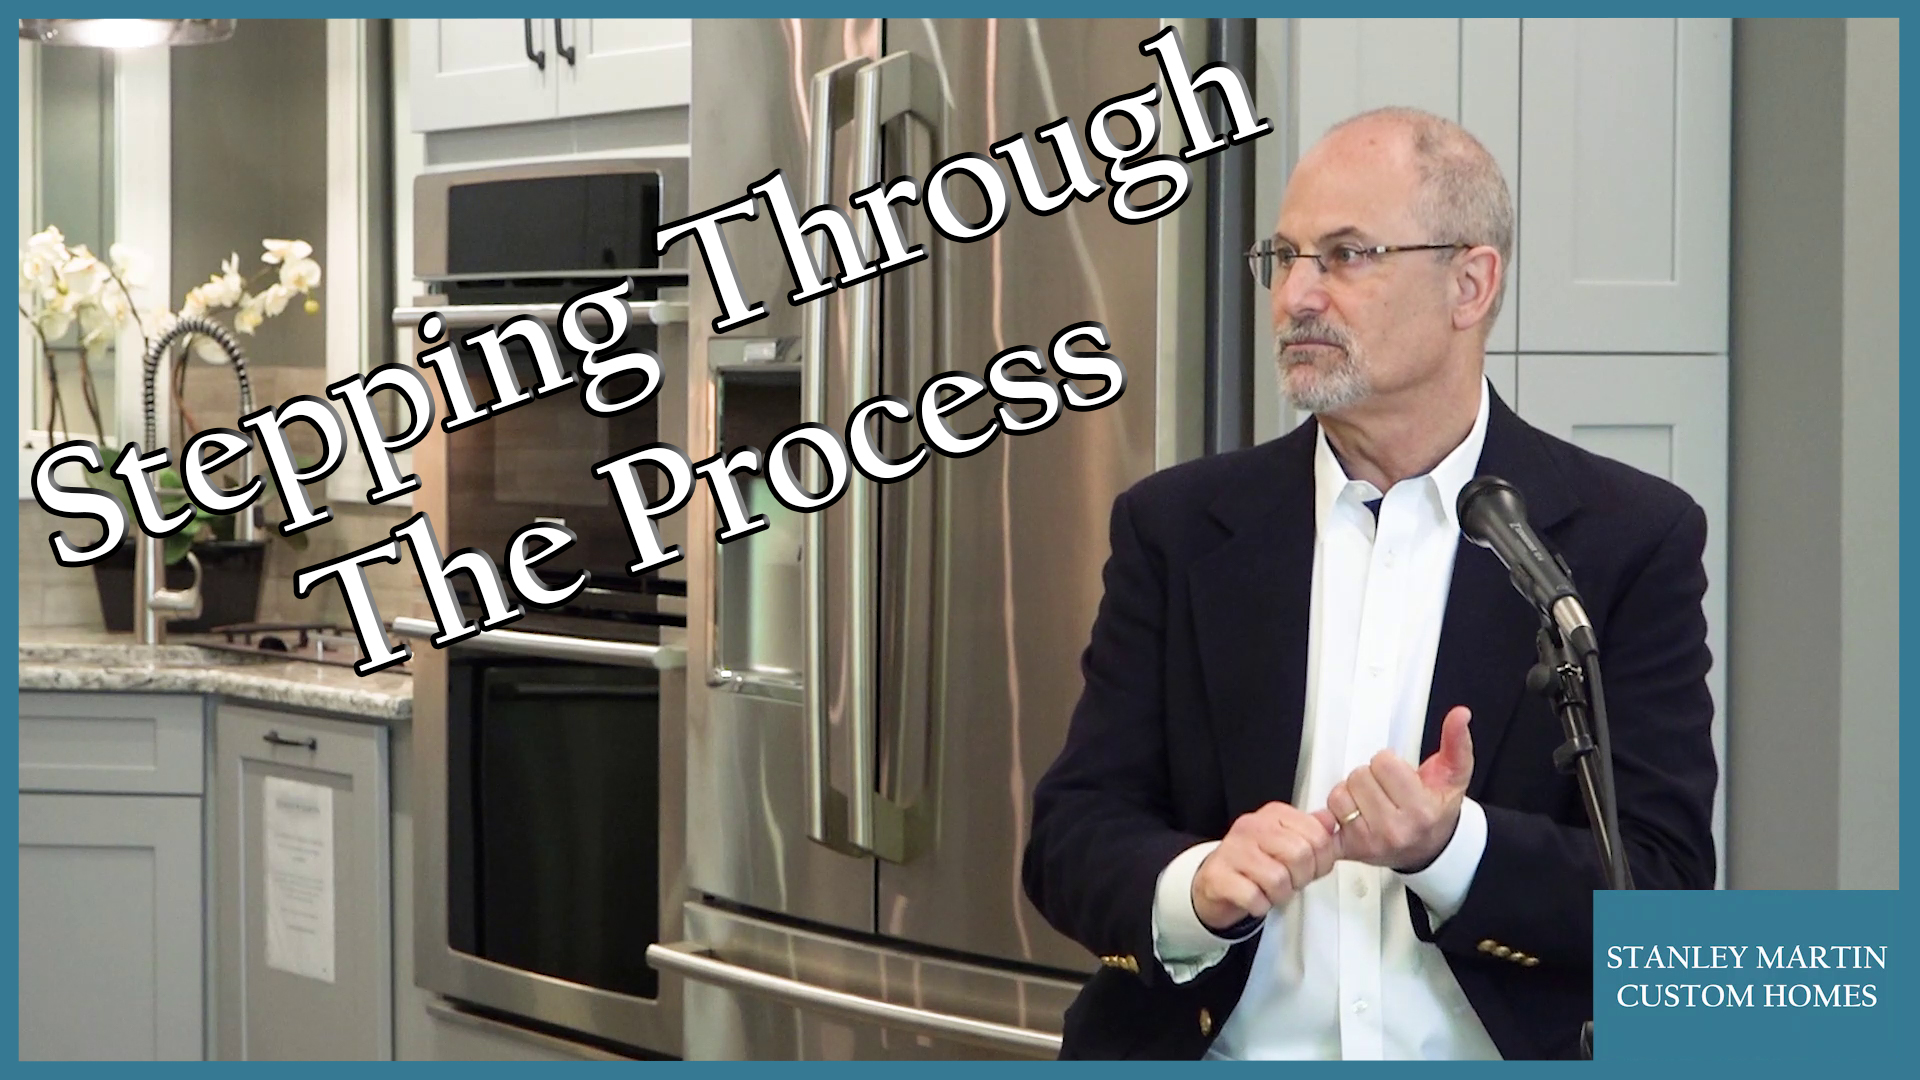 Stanley Martin Custom Homes | Stepping Through the Process